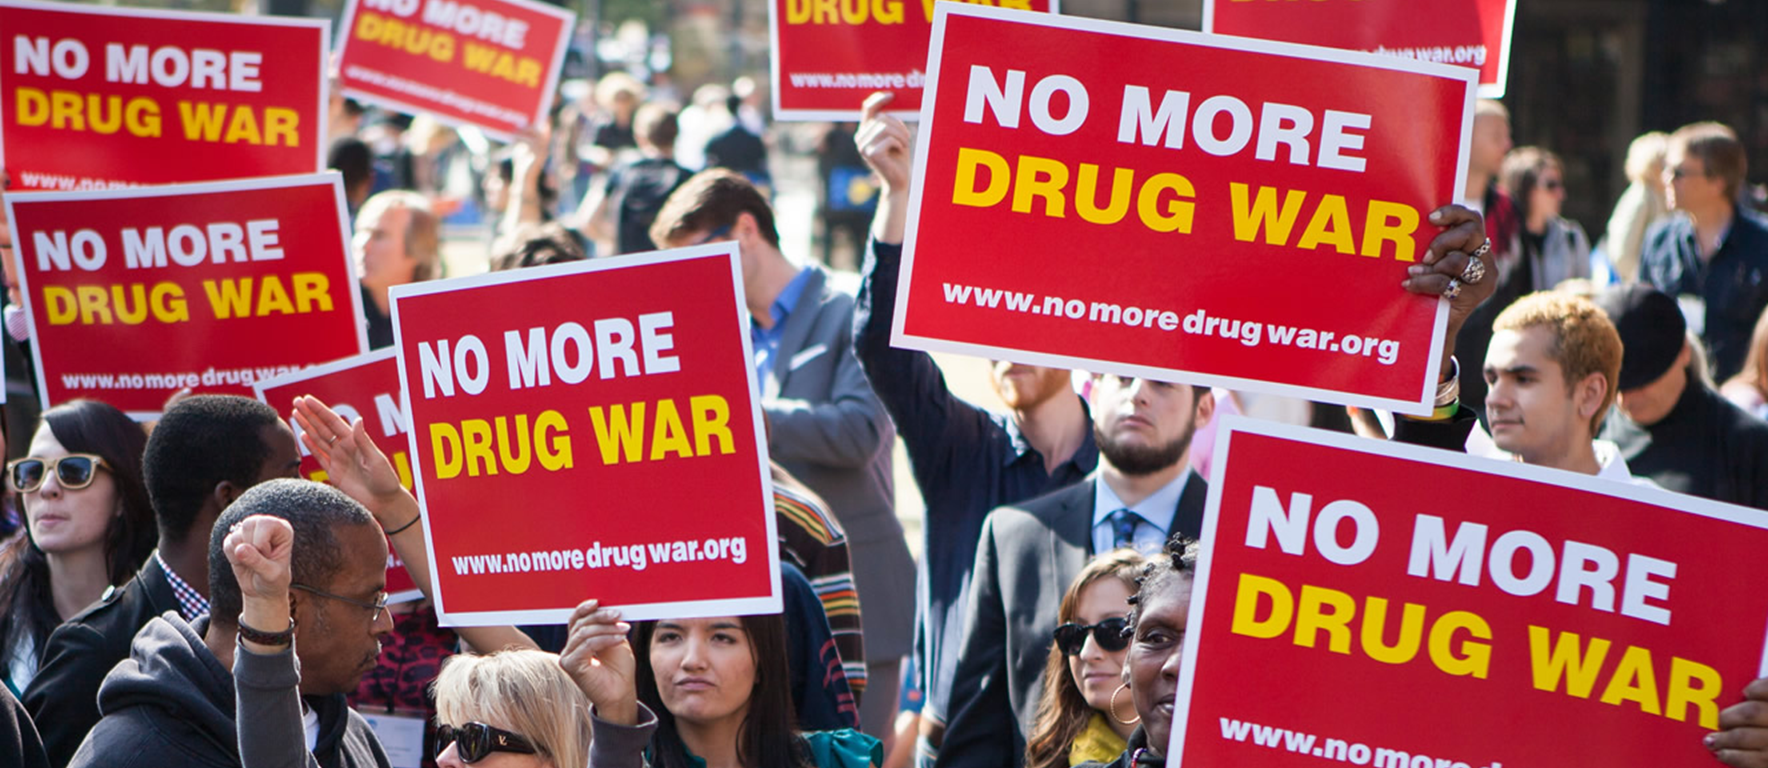 Protest against the war on drugs in America